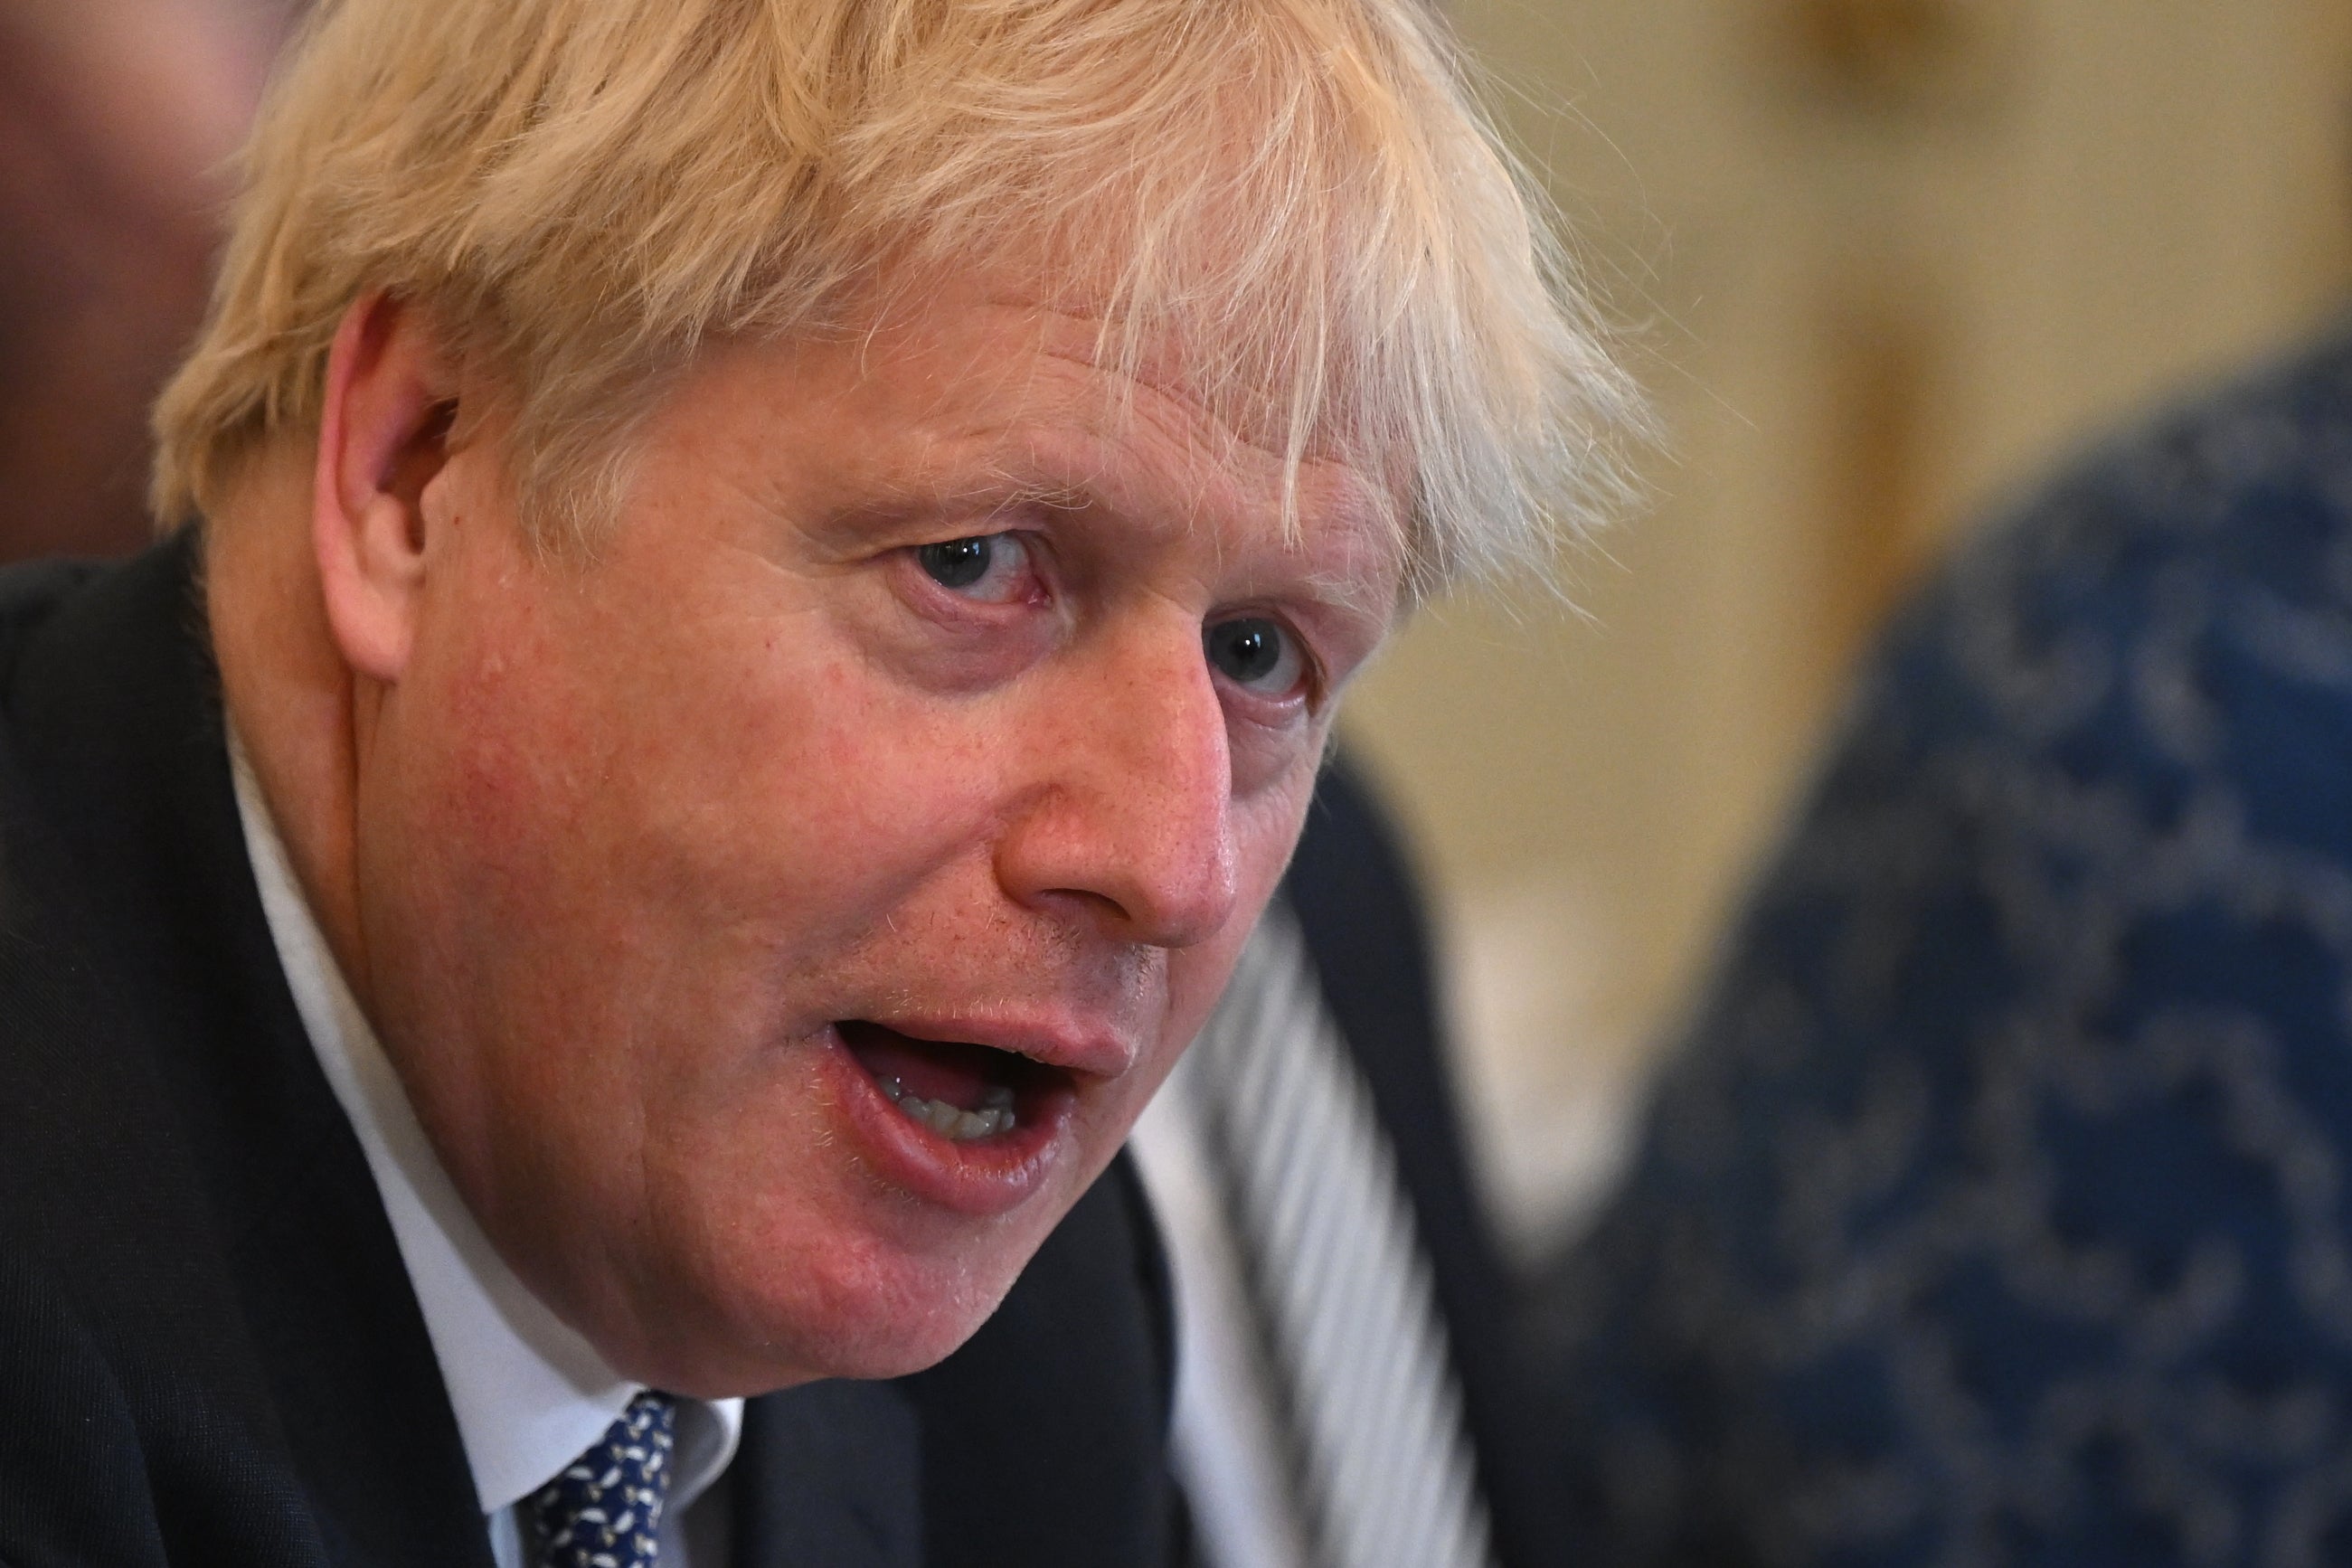 Boris Johnson ‘needs to accept he is the problem’ and quit as PM, Ian Blackford said (Justin Tallis/PA)